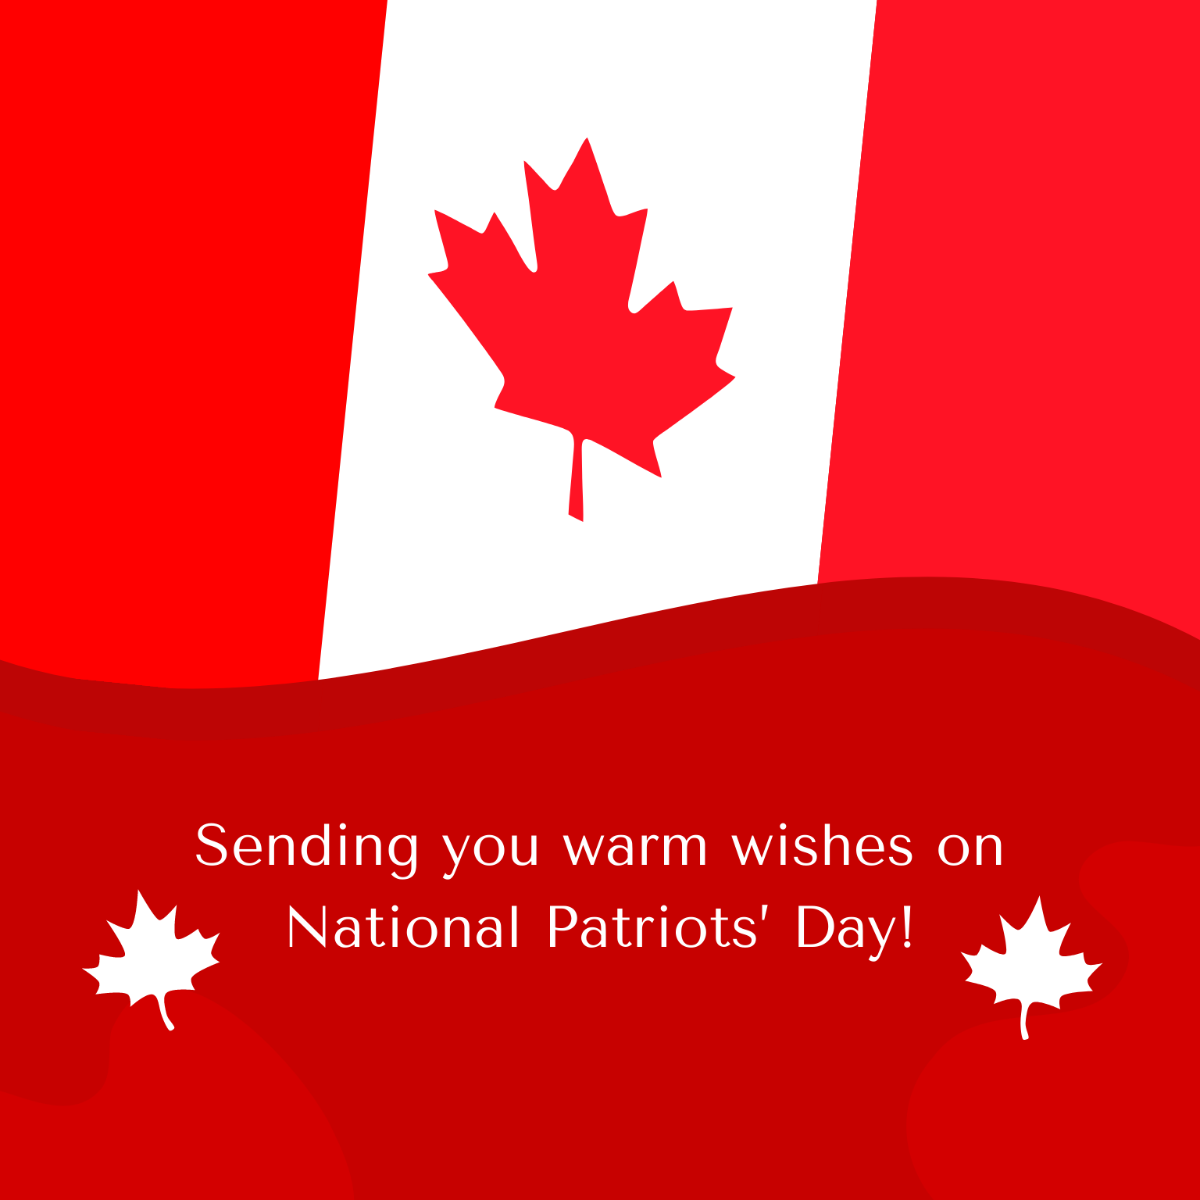 National Patriots' Day Wishes Vector Template